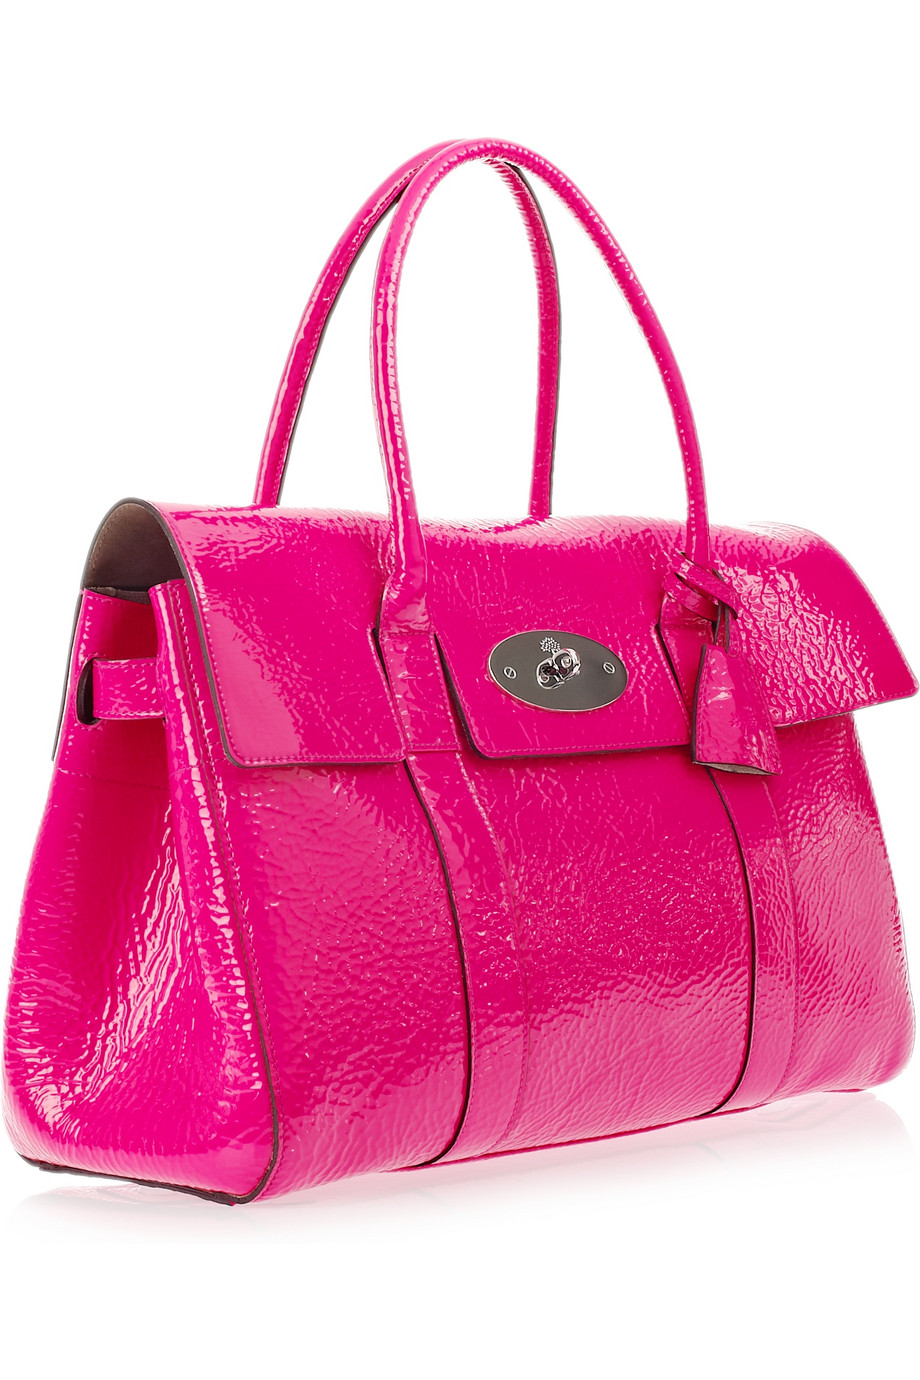 Mulberry Bayswater Patent-leather Bag in Pink - Lyst